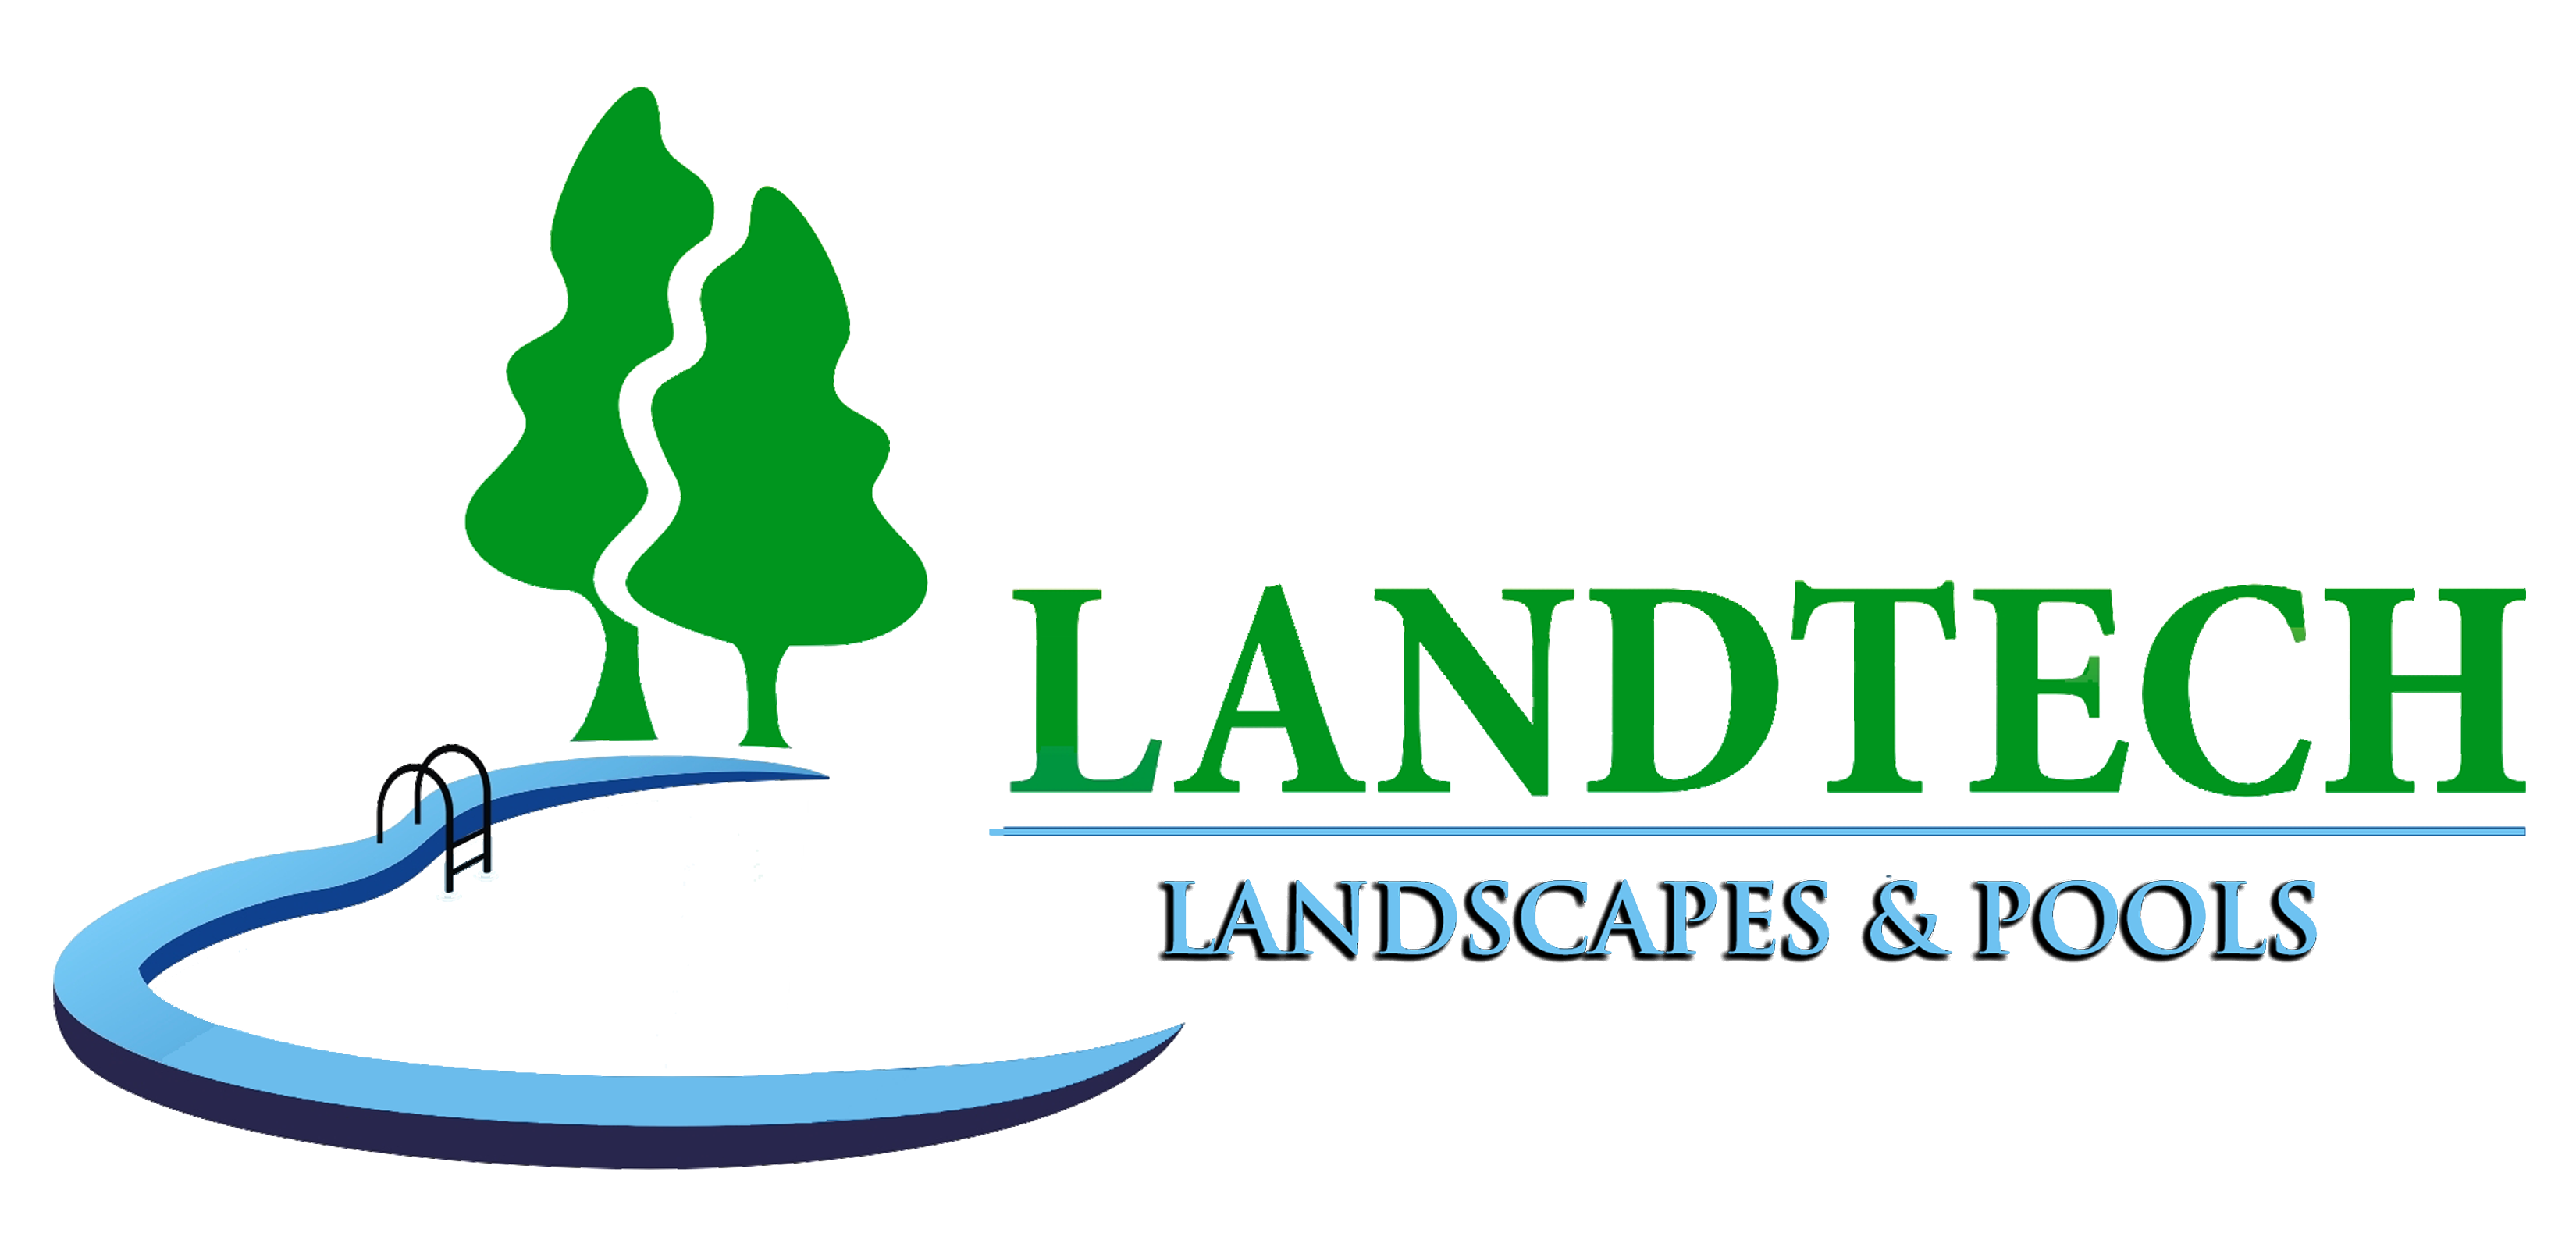 landscaping clipart country landscape